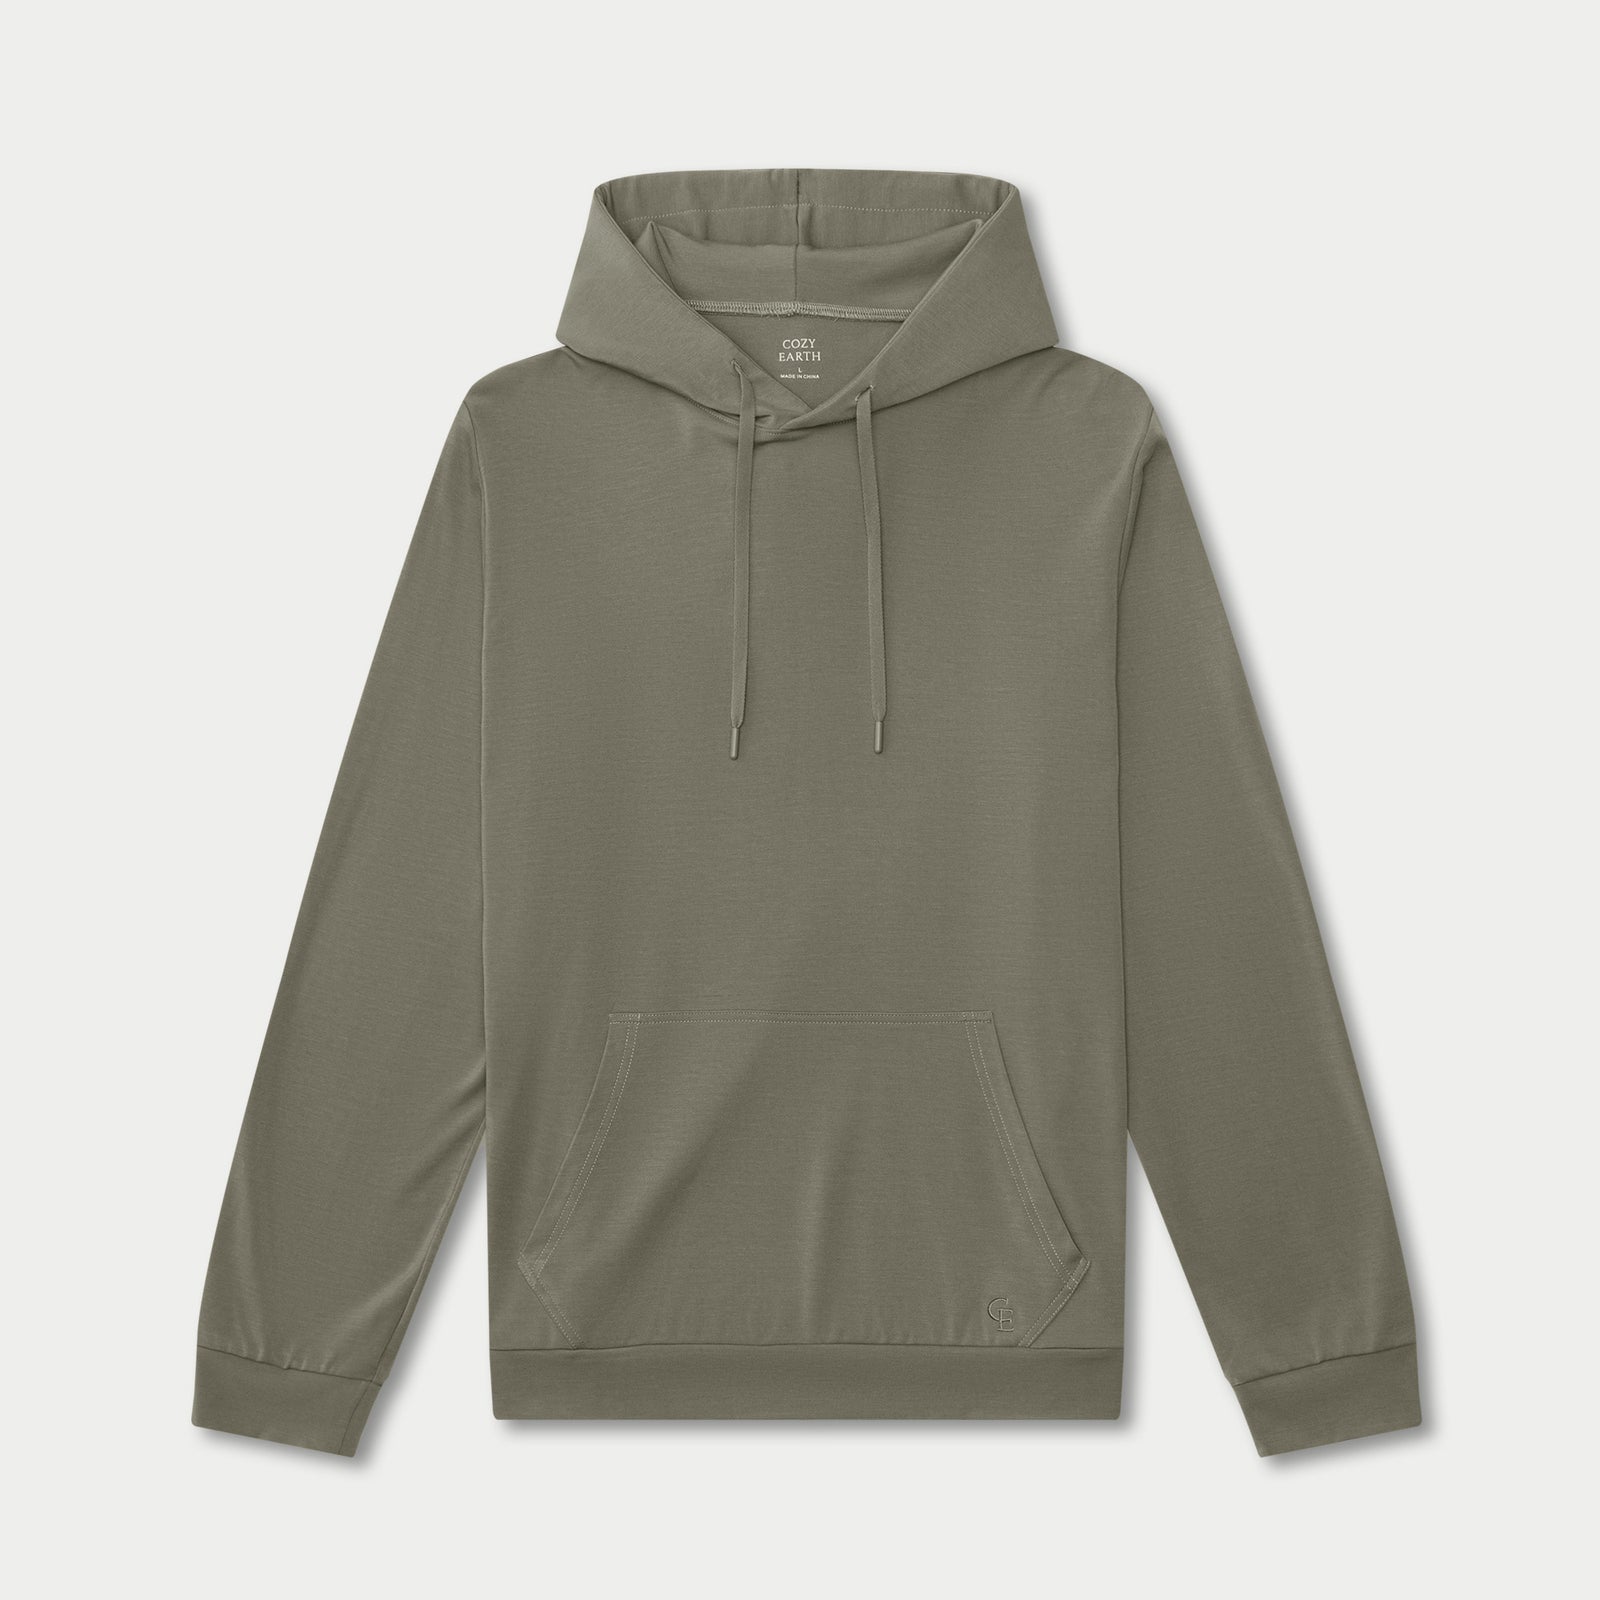 Moss Bamboo Hoodie lying on white background.